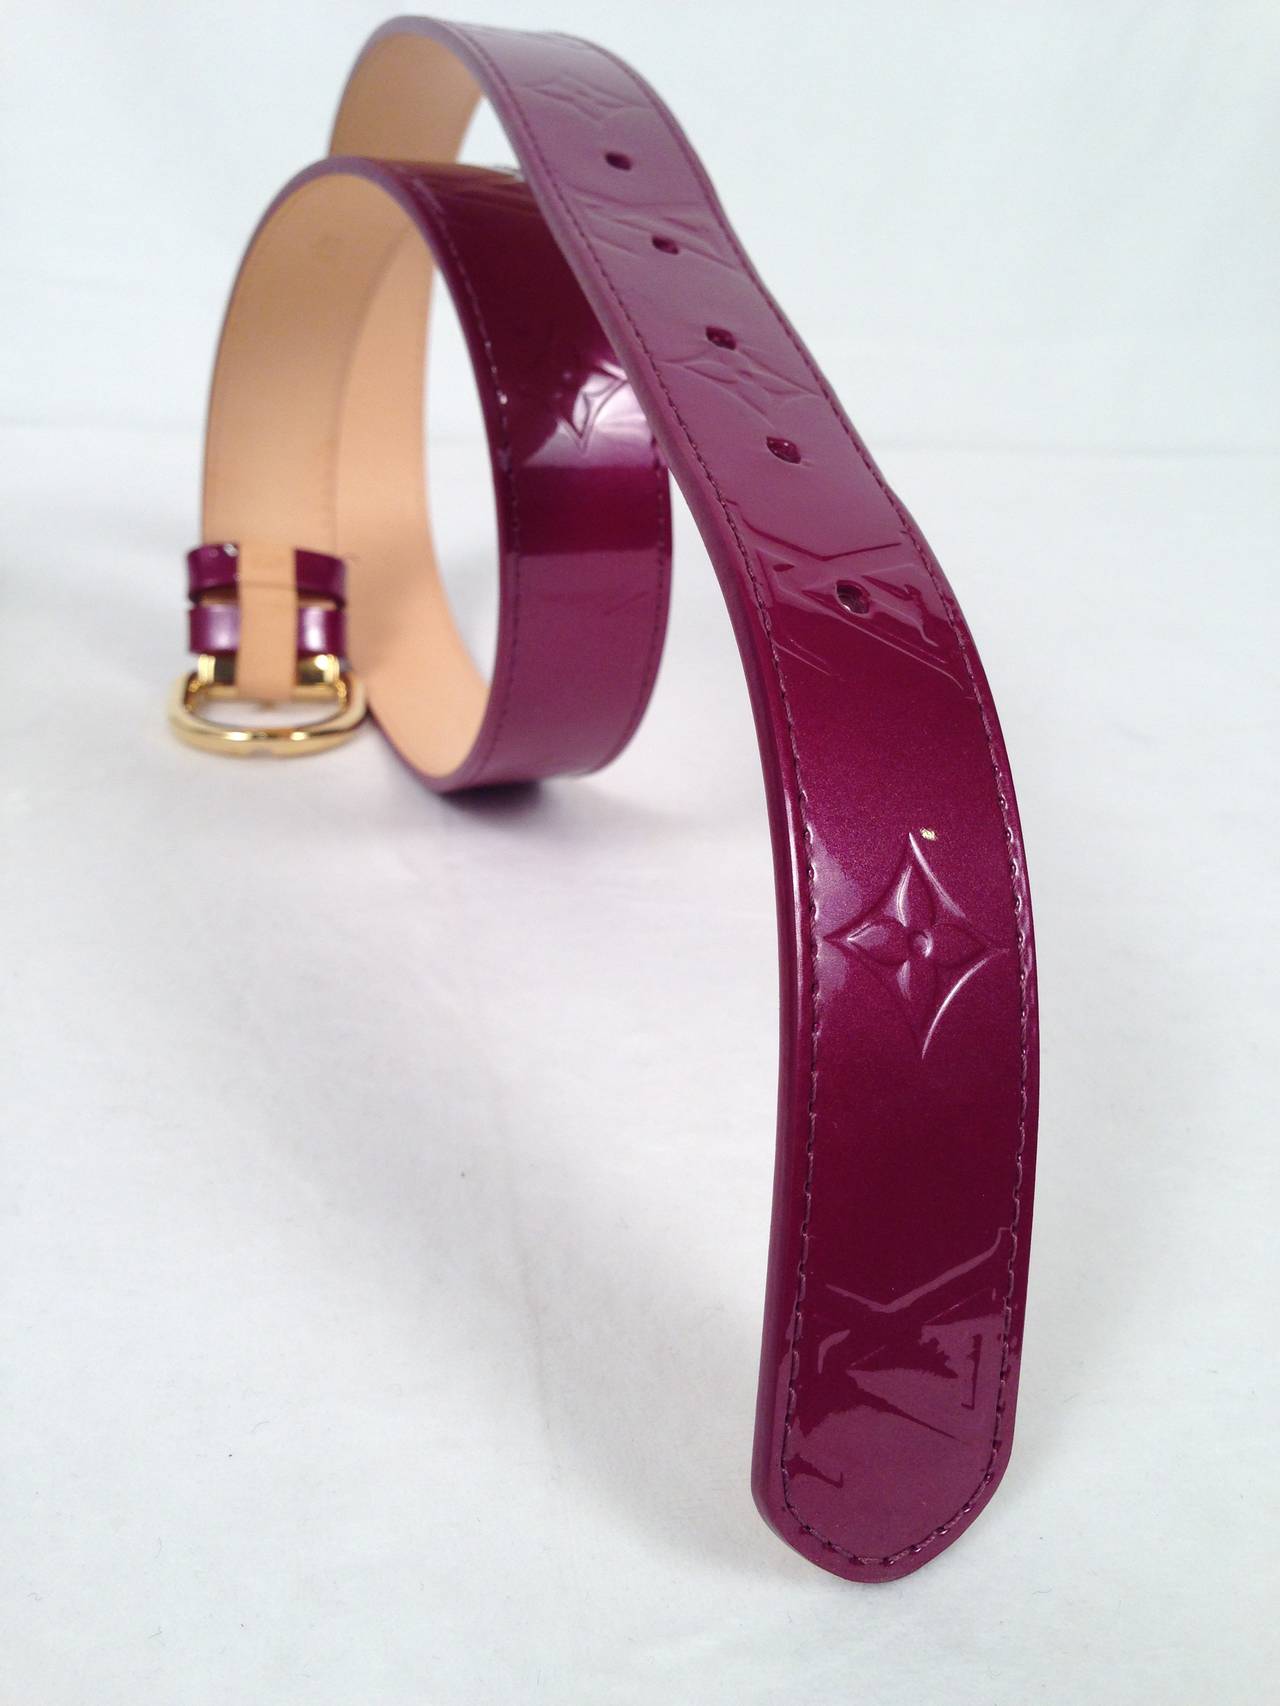 Cinch your waist with luxurious Louis Vuitton Vernis belt!  Purple Monogram embossed patent leather belt features gold hardware with Louis Vuitton logo.  Color actually changes in different light!  Original box included.  Made in France.